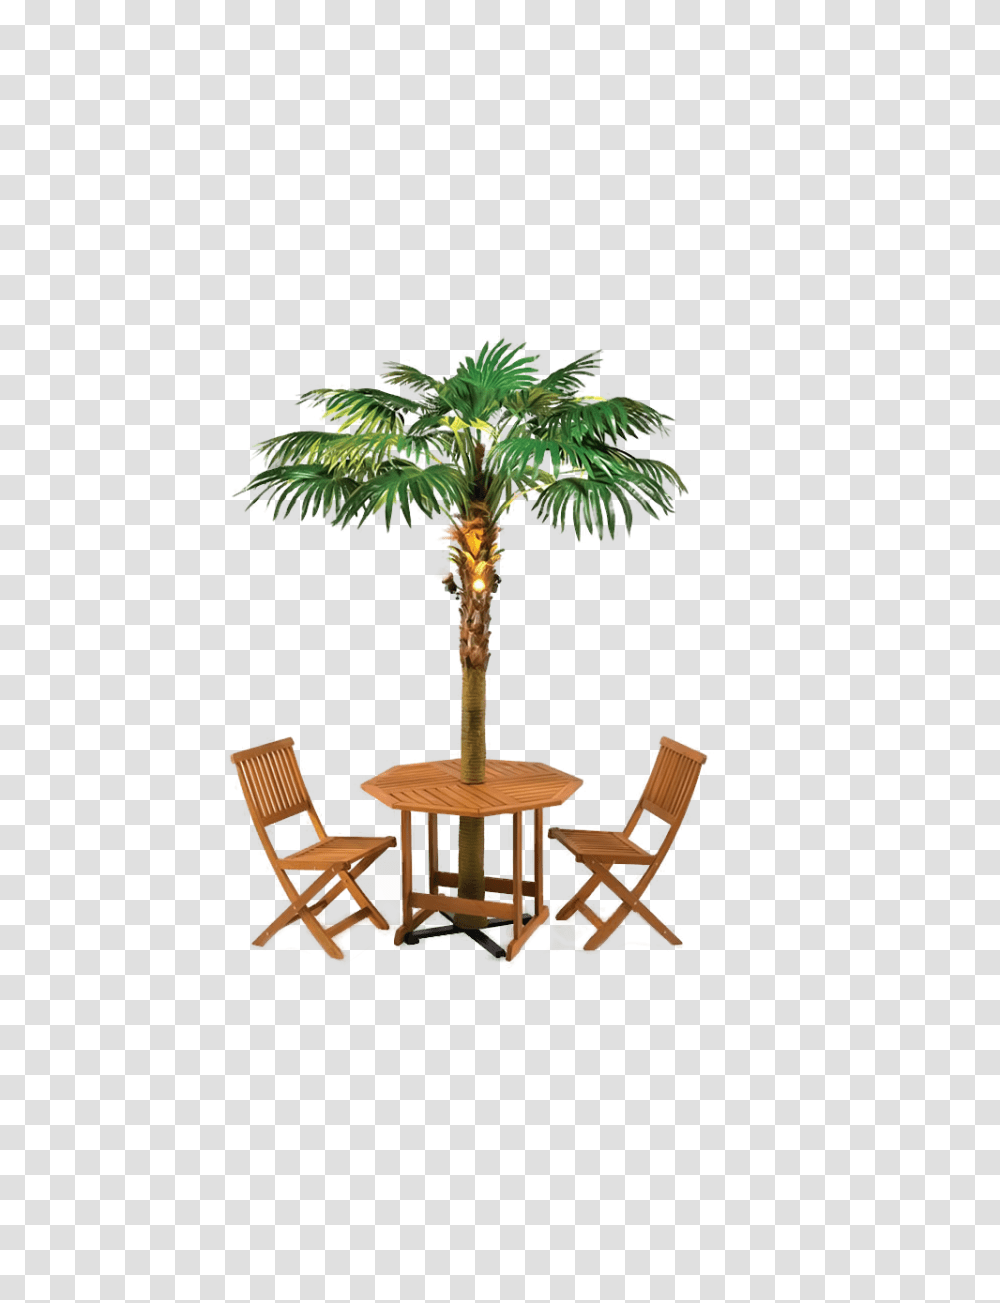 Country, Tree, Plant, Chair Transparent Png